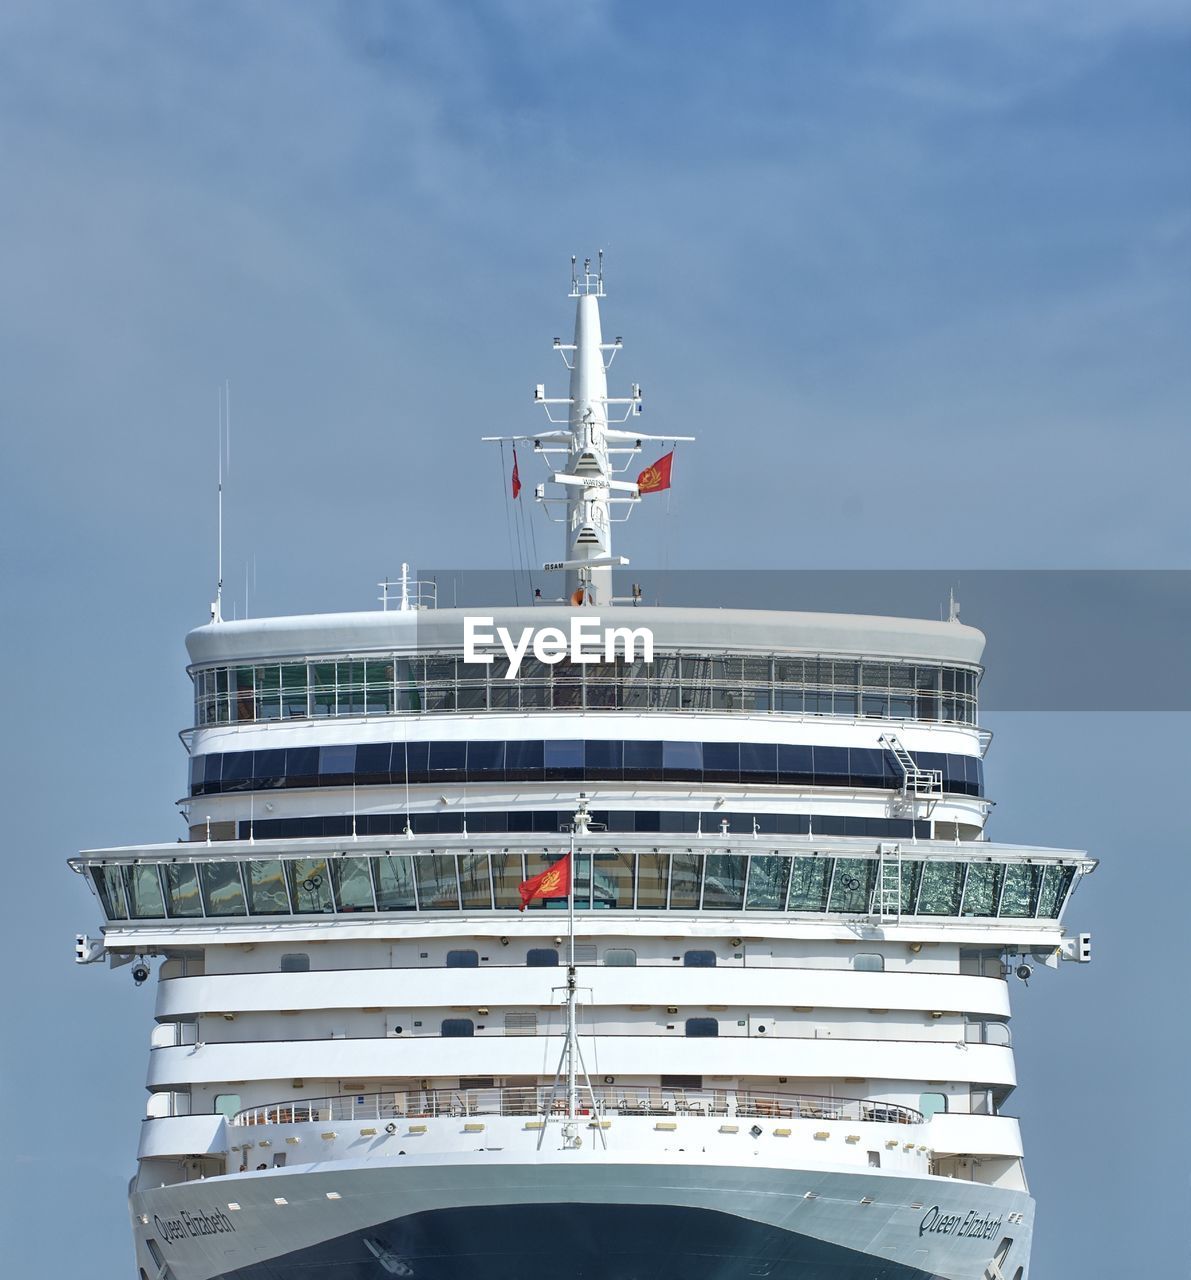 cruise ship, vehicle, ship, passenger ship, ocean liner, nautical vessel, motor ship, transportation, sky, watercraft, architecture, water, nature, cruise, mode of transportation, sea, travel, no people, built structure, outdoors, business, industry, naval architecture, boat, tower, luxury, blue, harbor, building exterior, craft, wealth, day